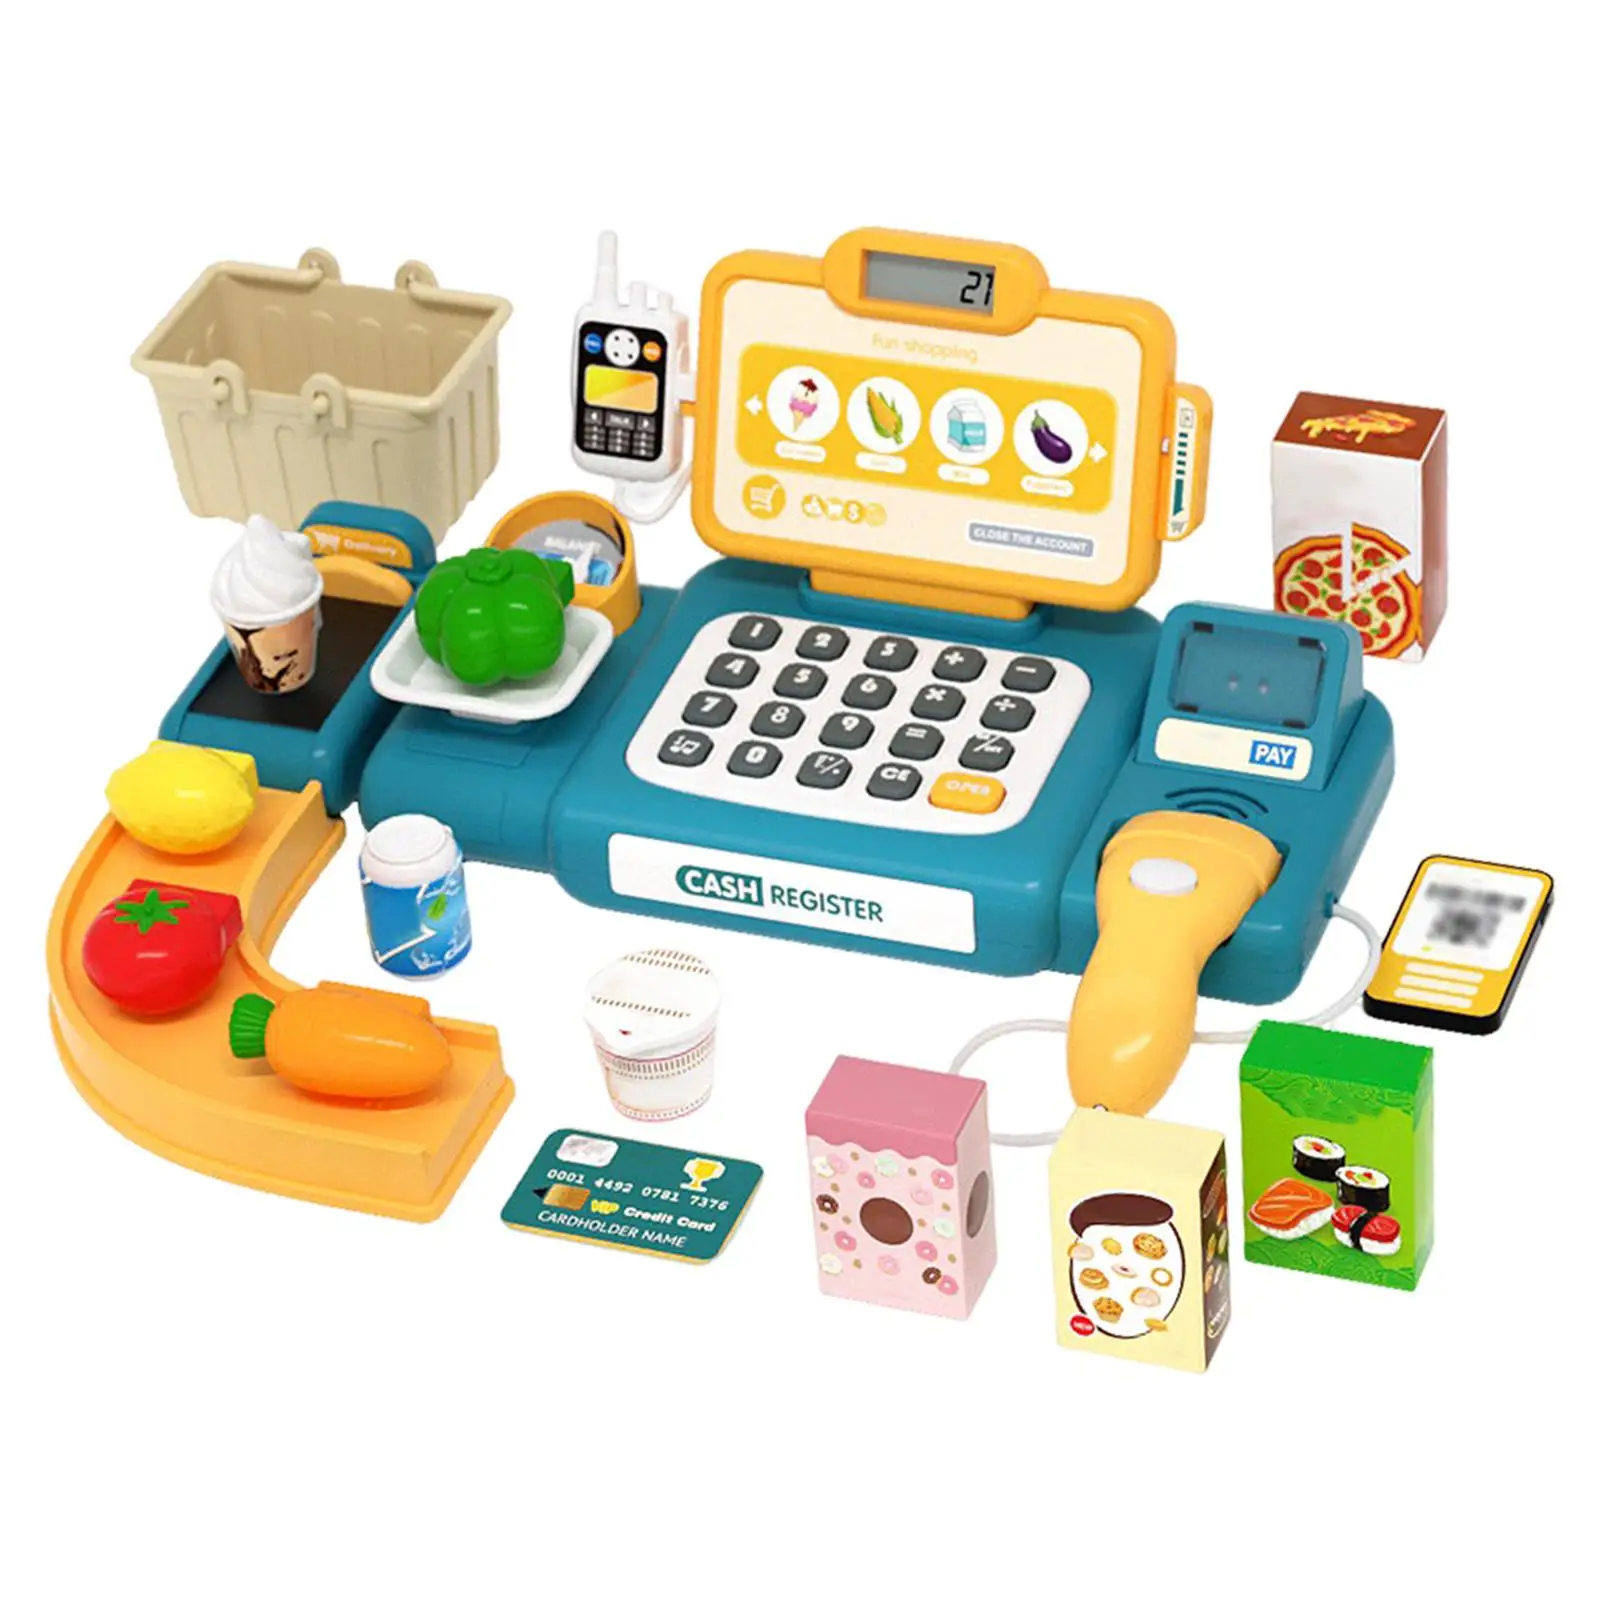 Pretend Play Store Educational Imaginative Electronic Classic Count Toy for Play Store Preschool Resource Role Play